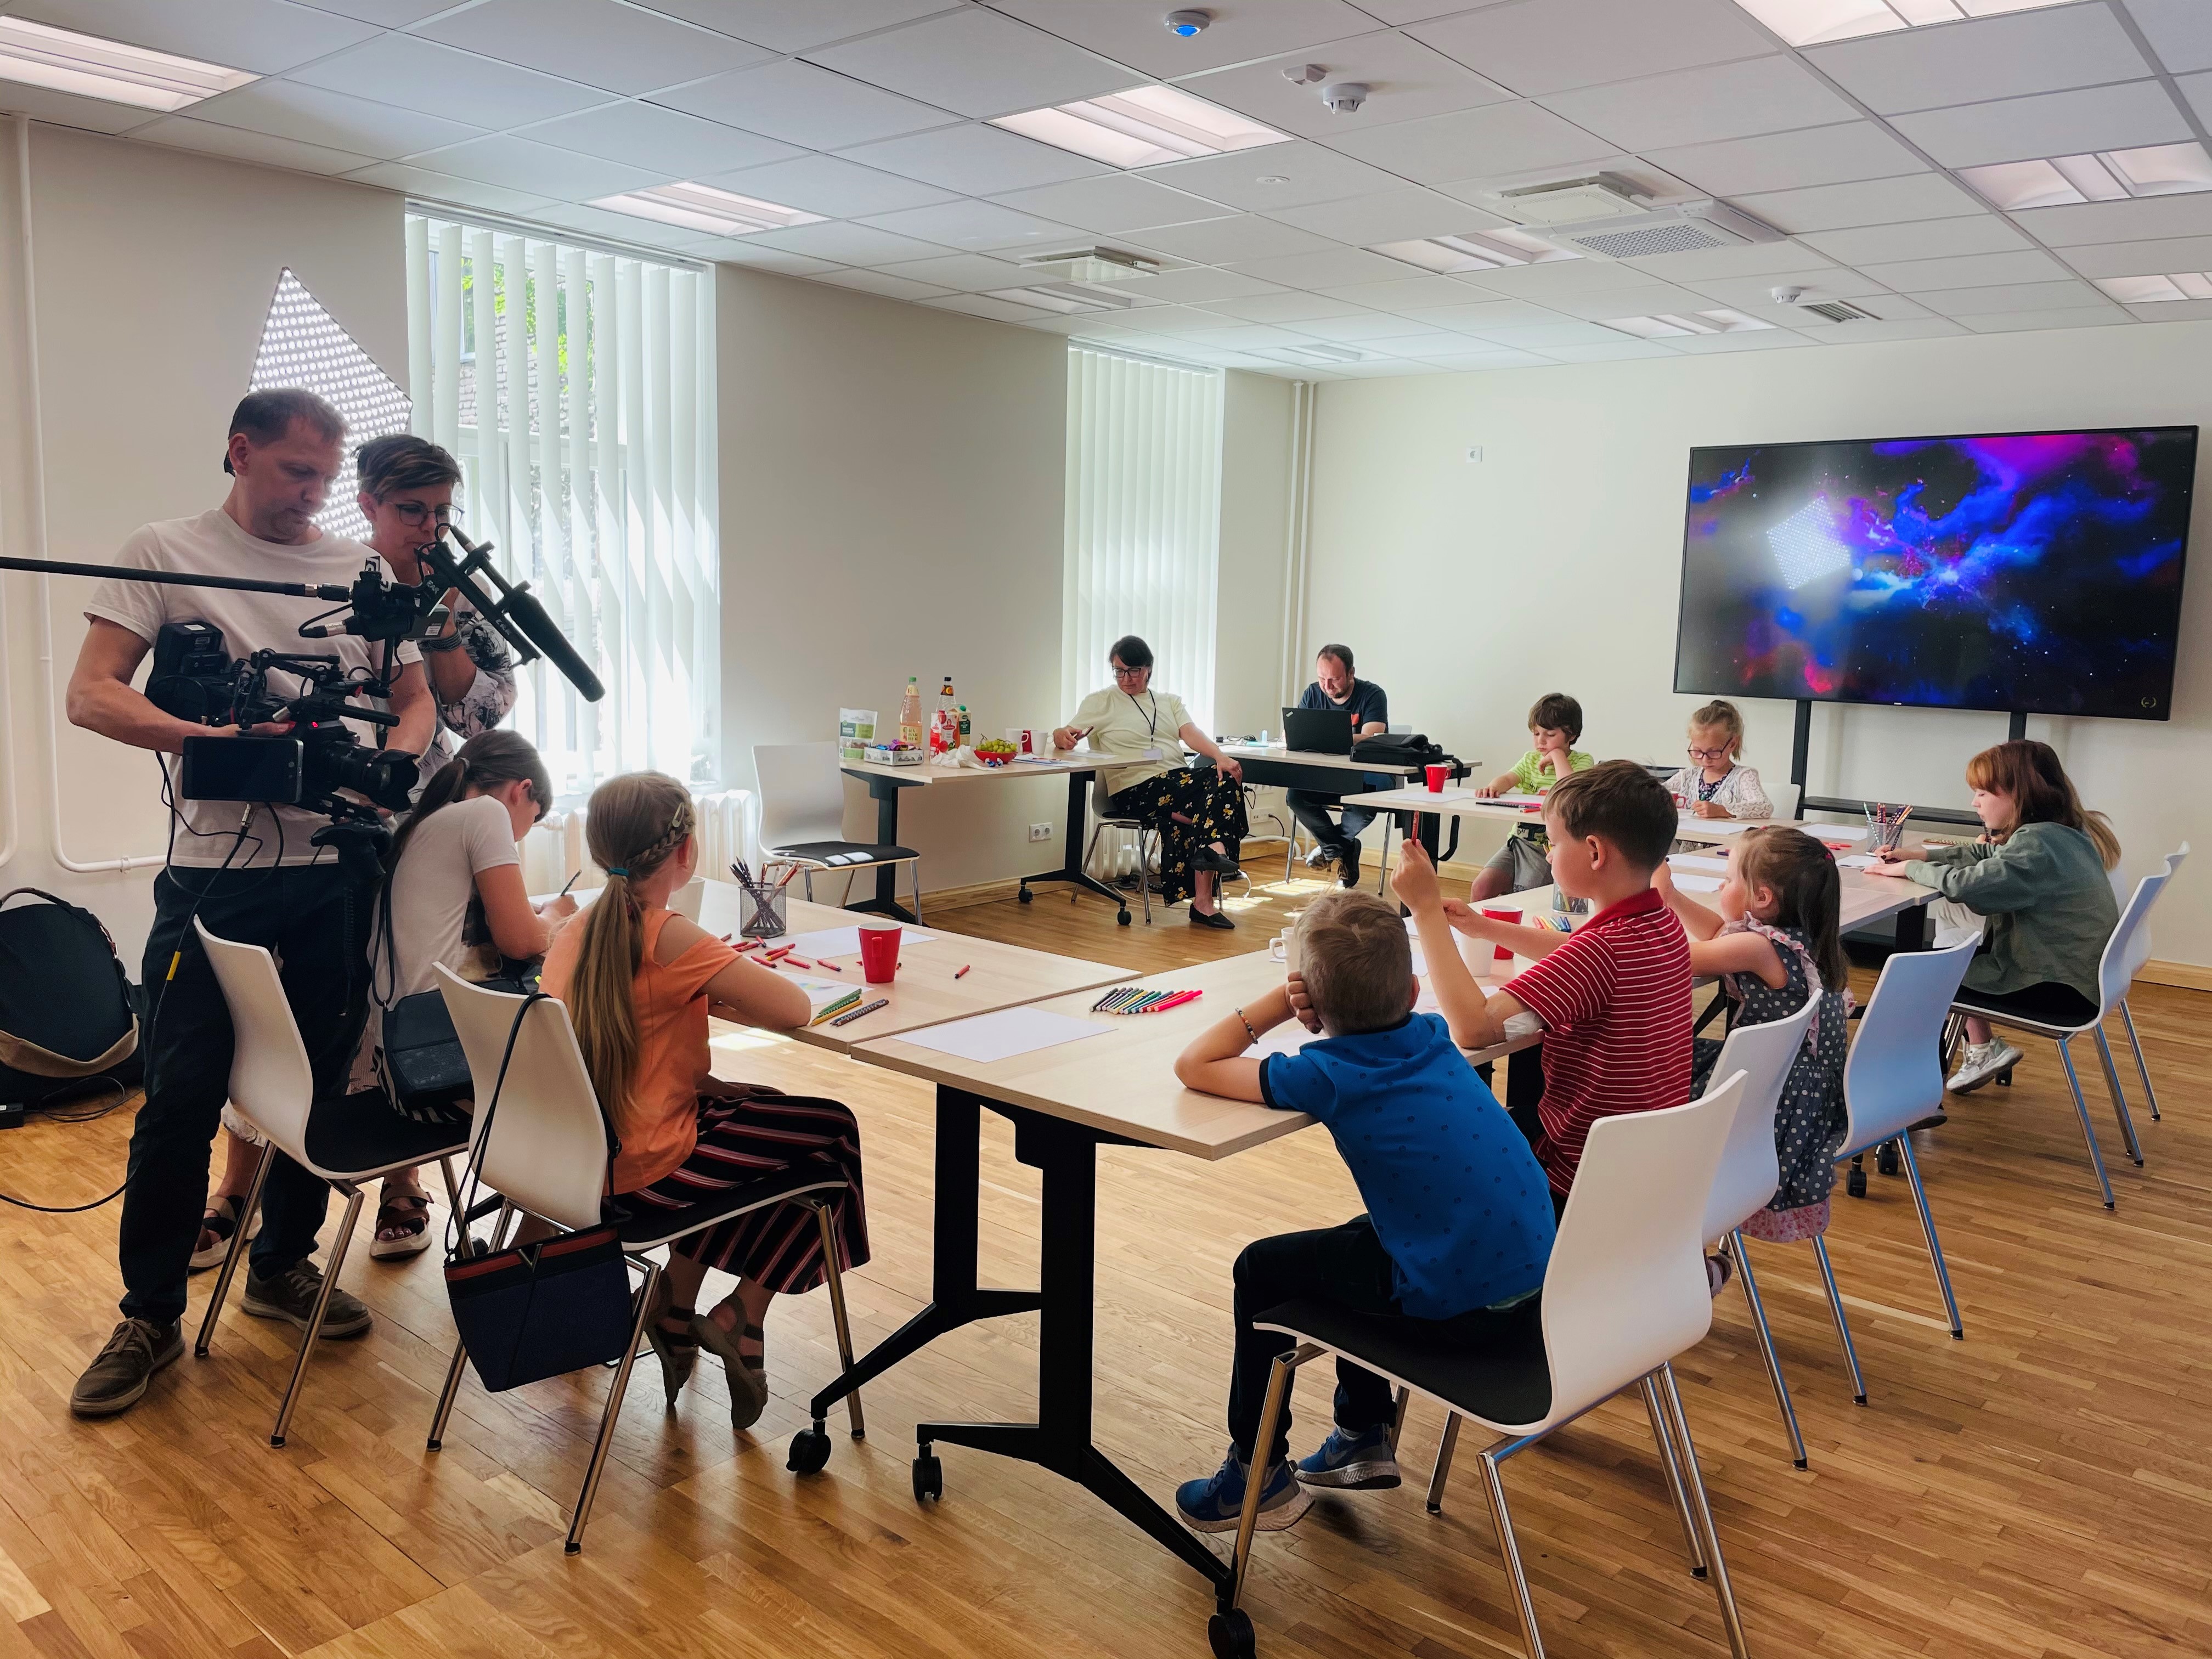 Children with extremely flying fantasy paid a visit to the Estonian Patent Office